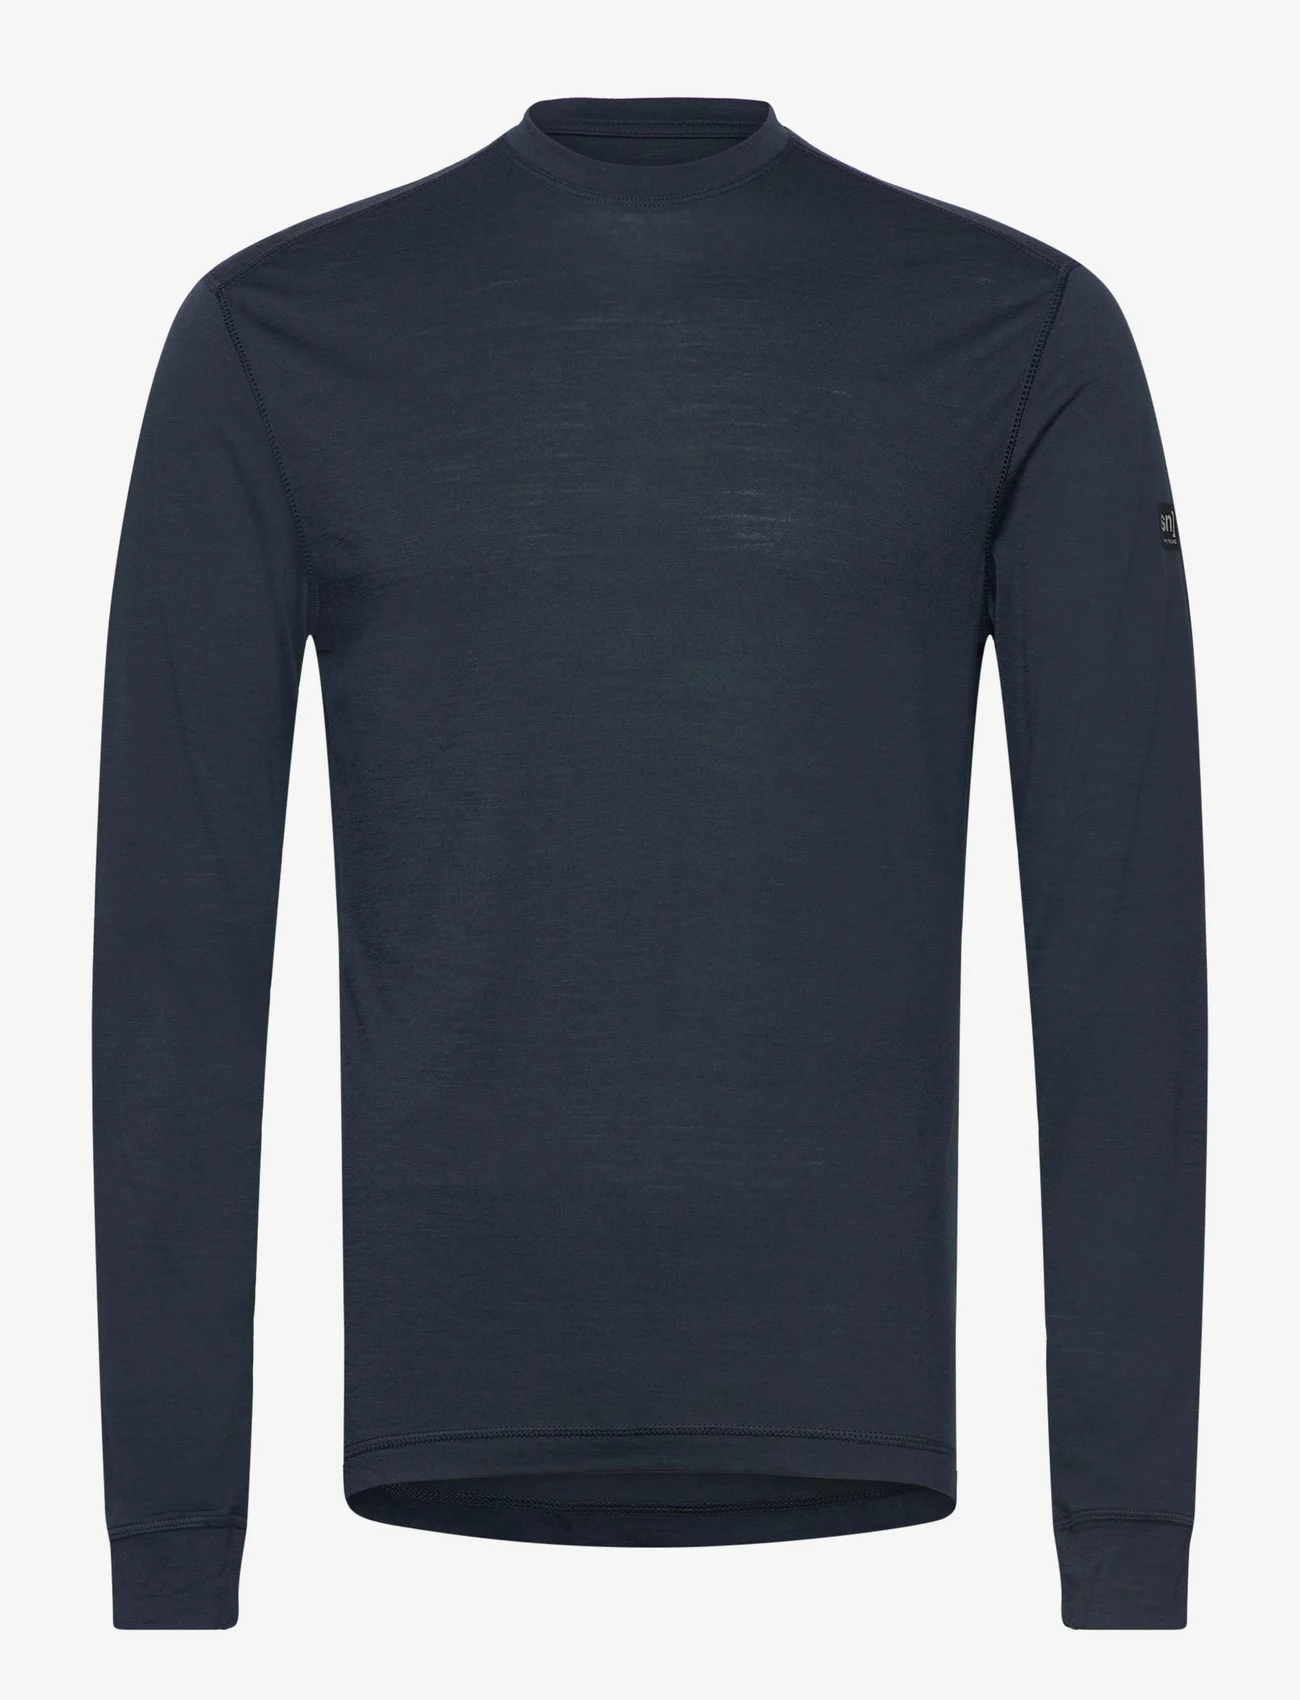 super.natural - M TUNDRA175 LS - base layer tops - blueberry - 0